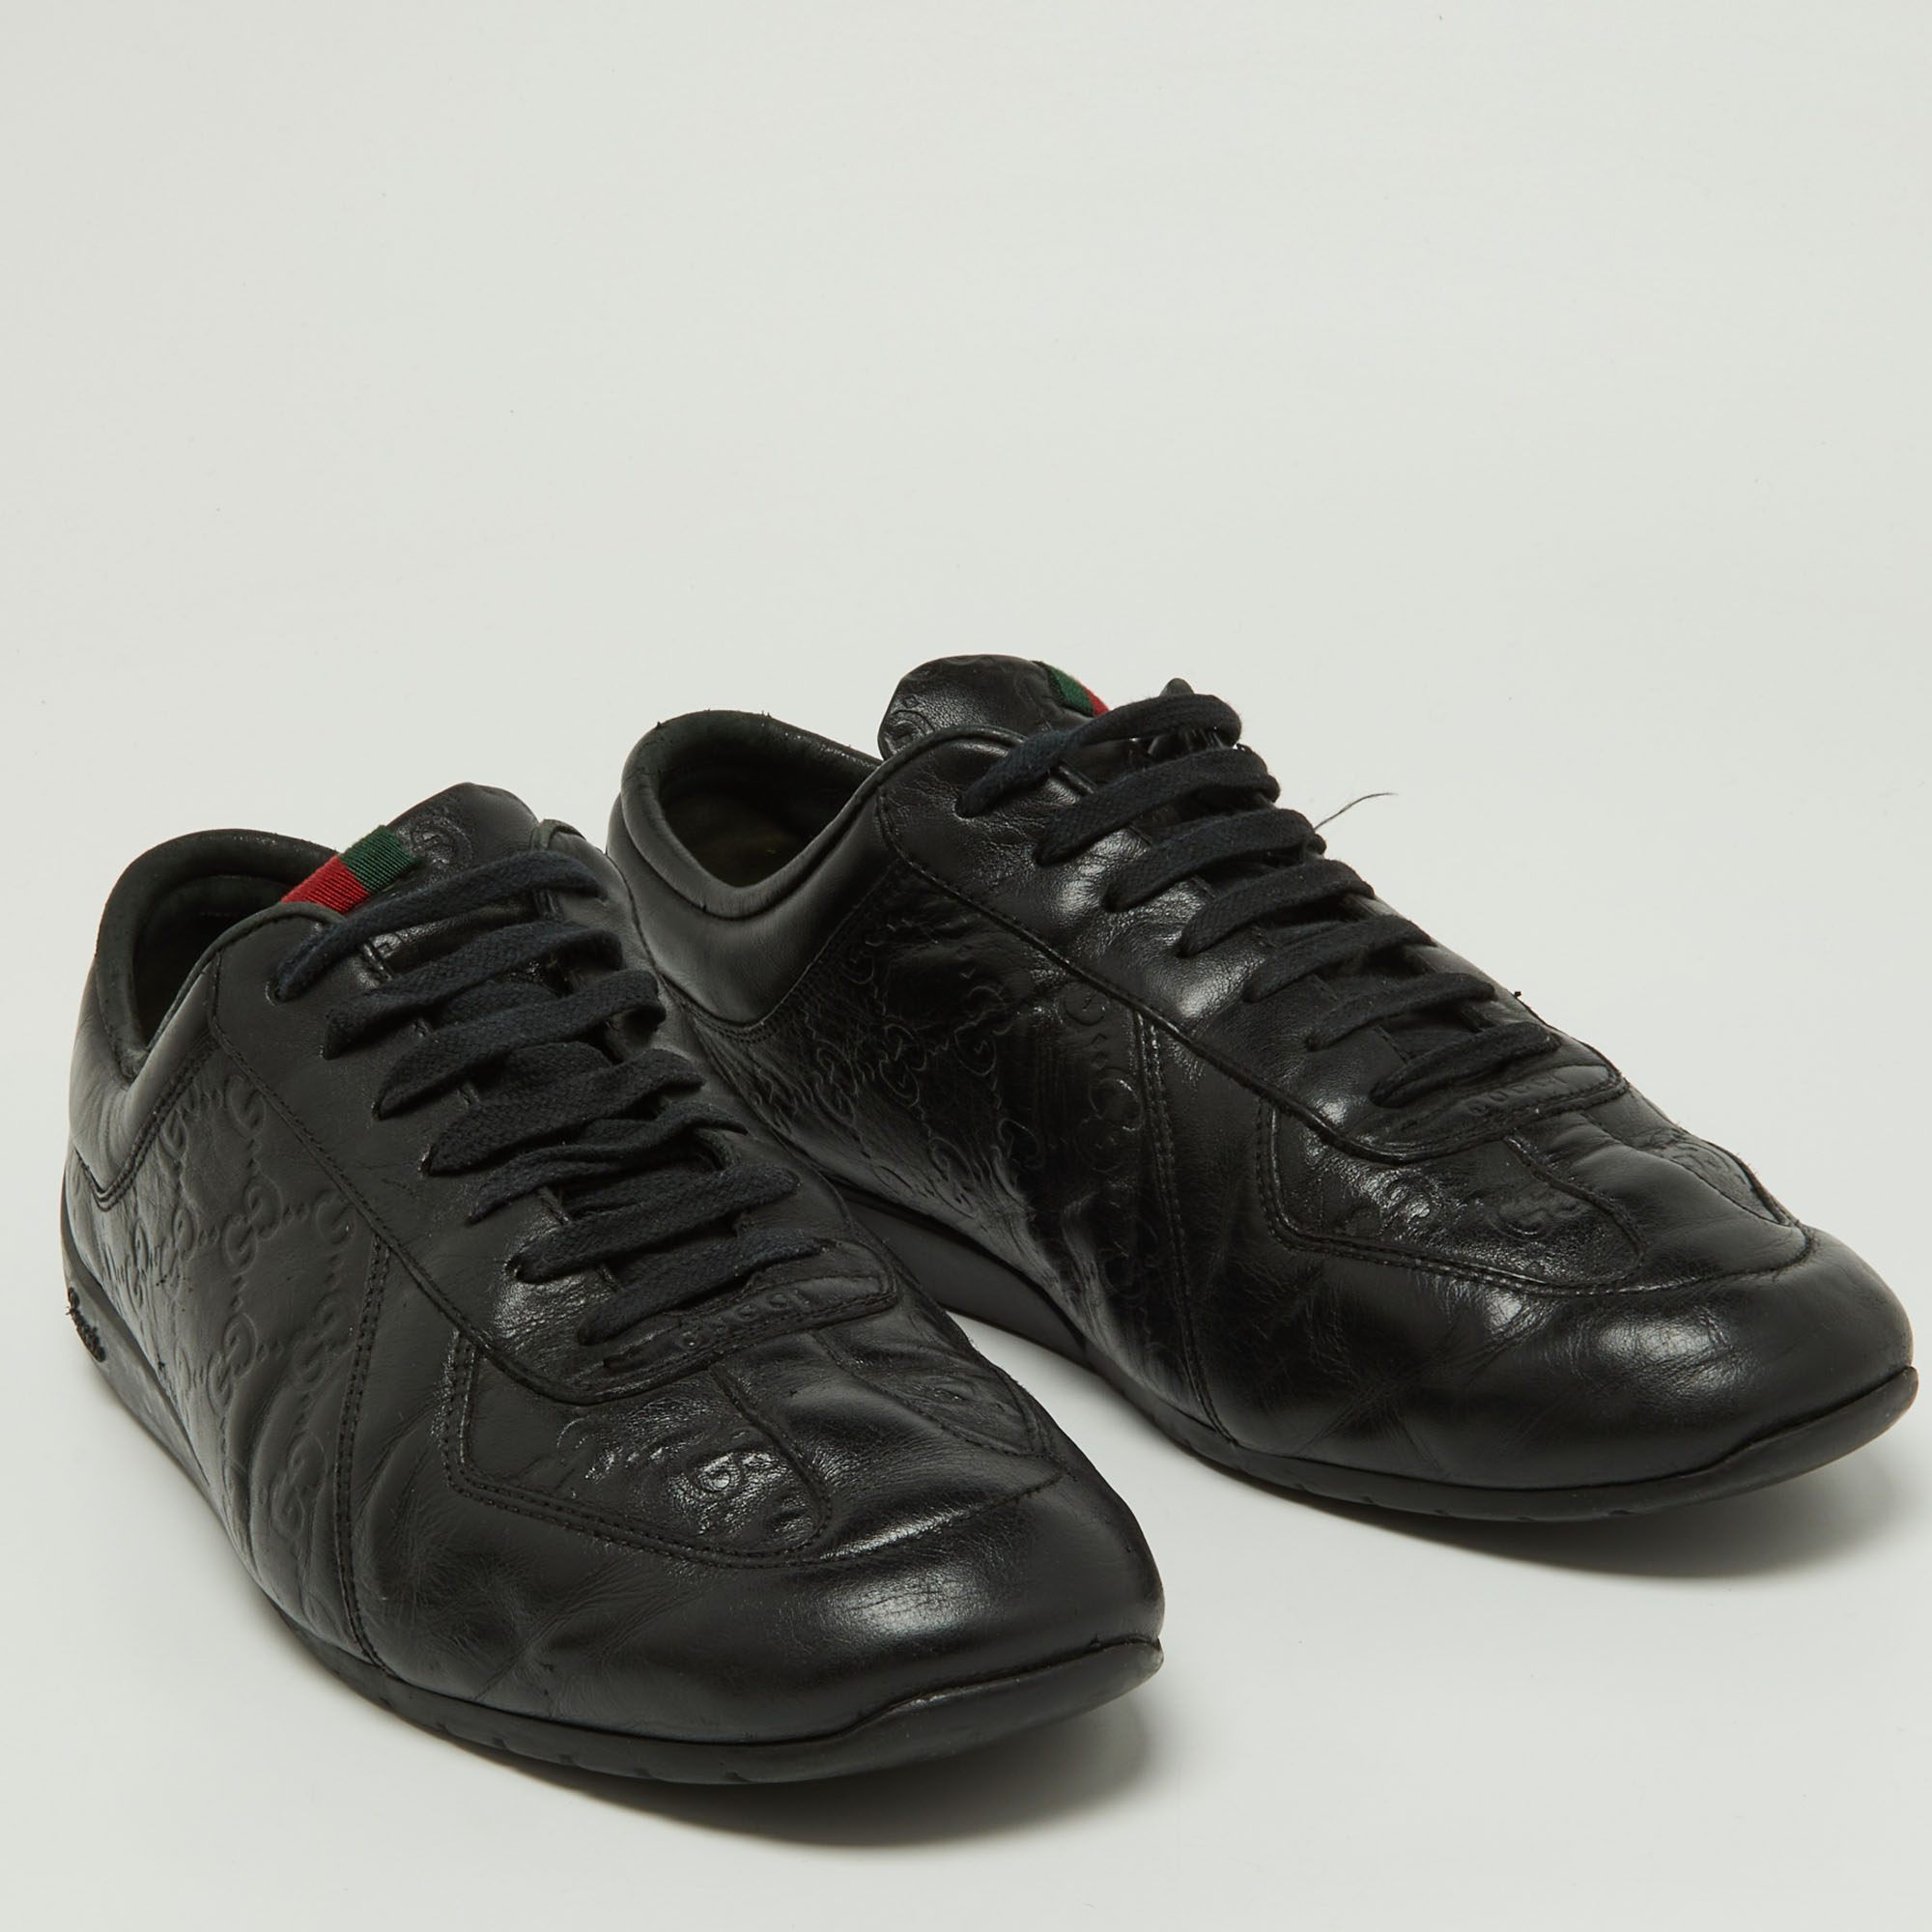 Gucci Black Guccissima Leather Low Top Sneakers Size 44.5